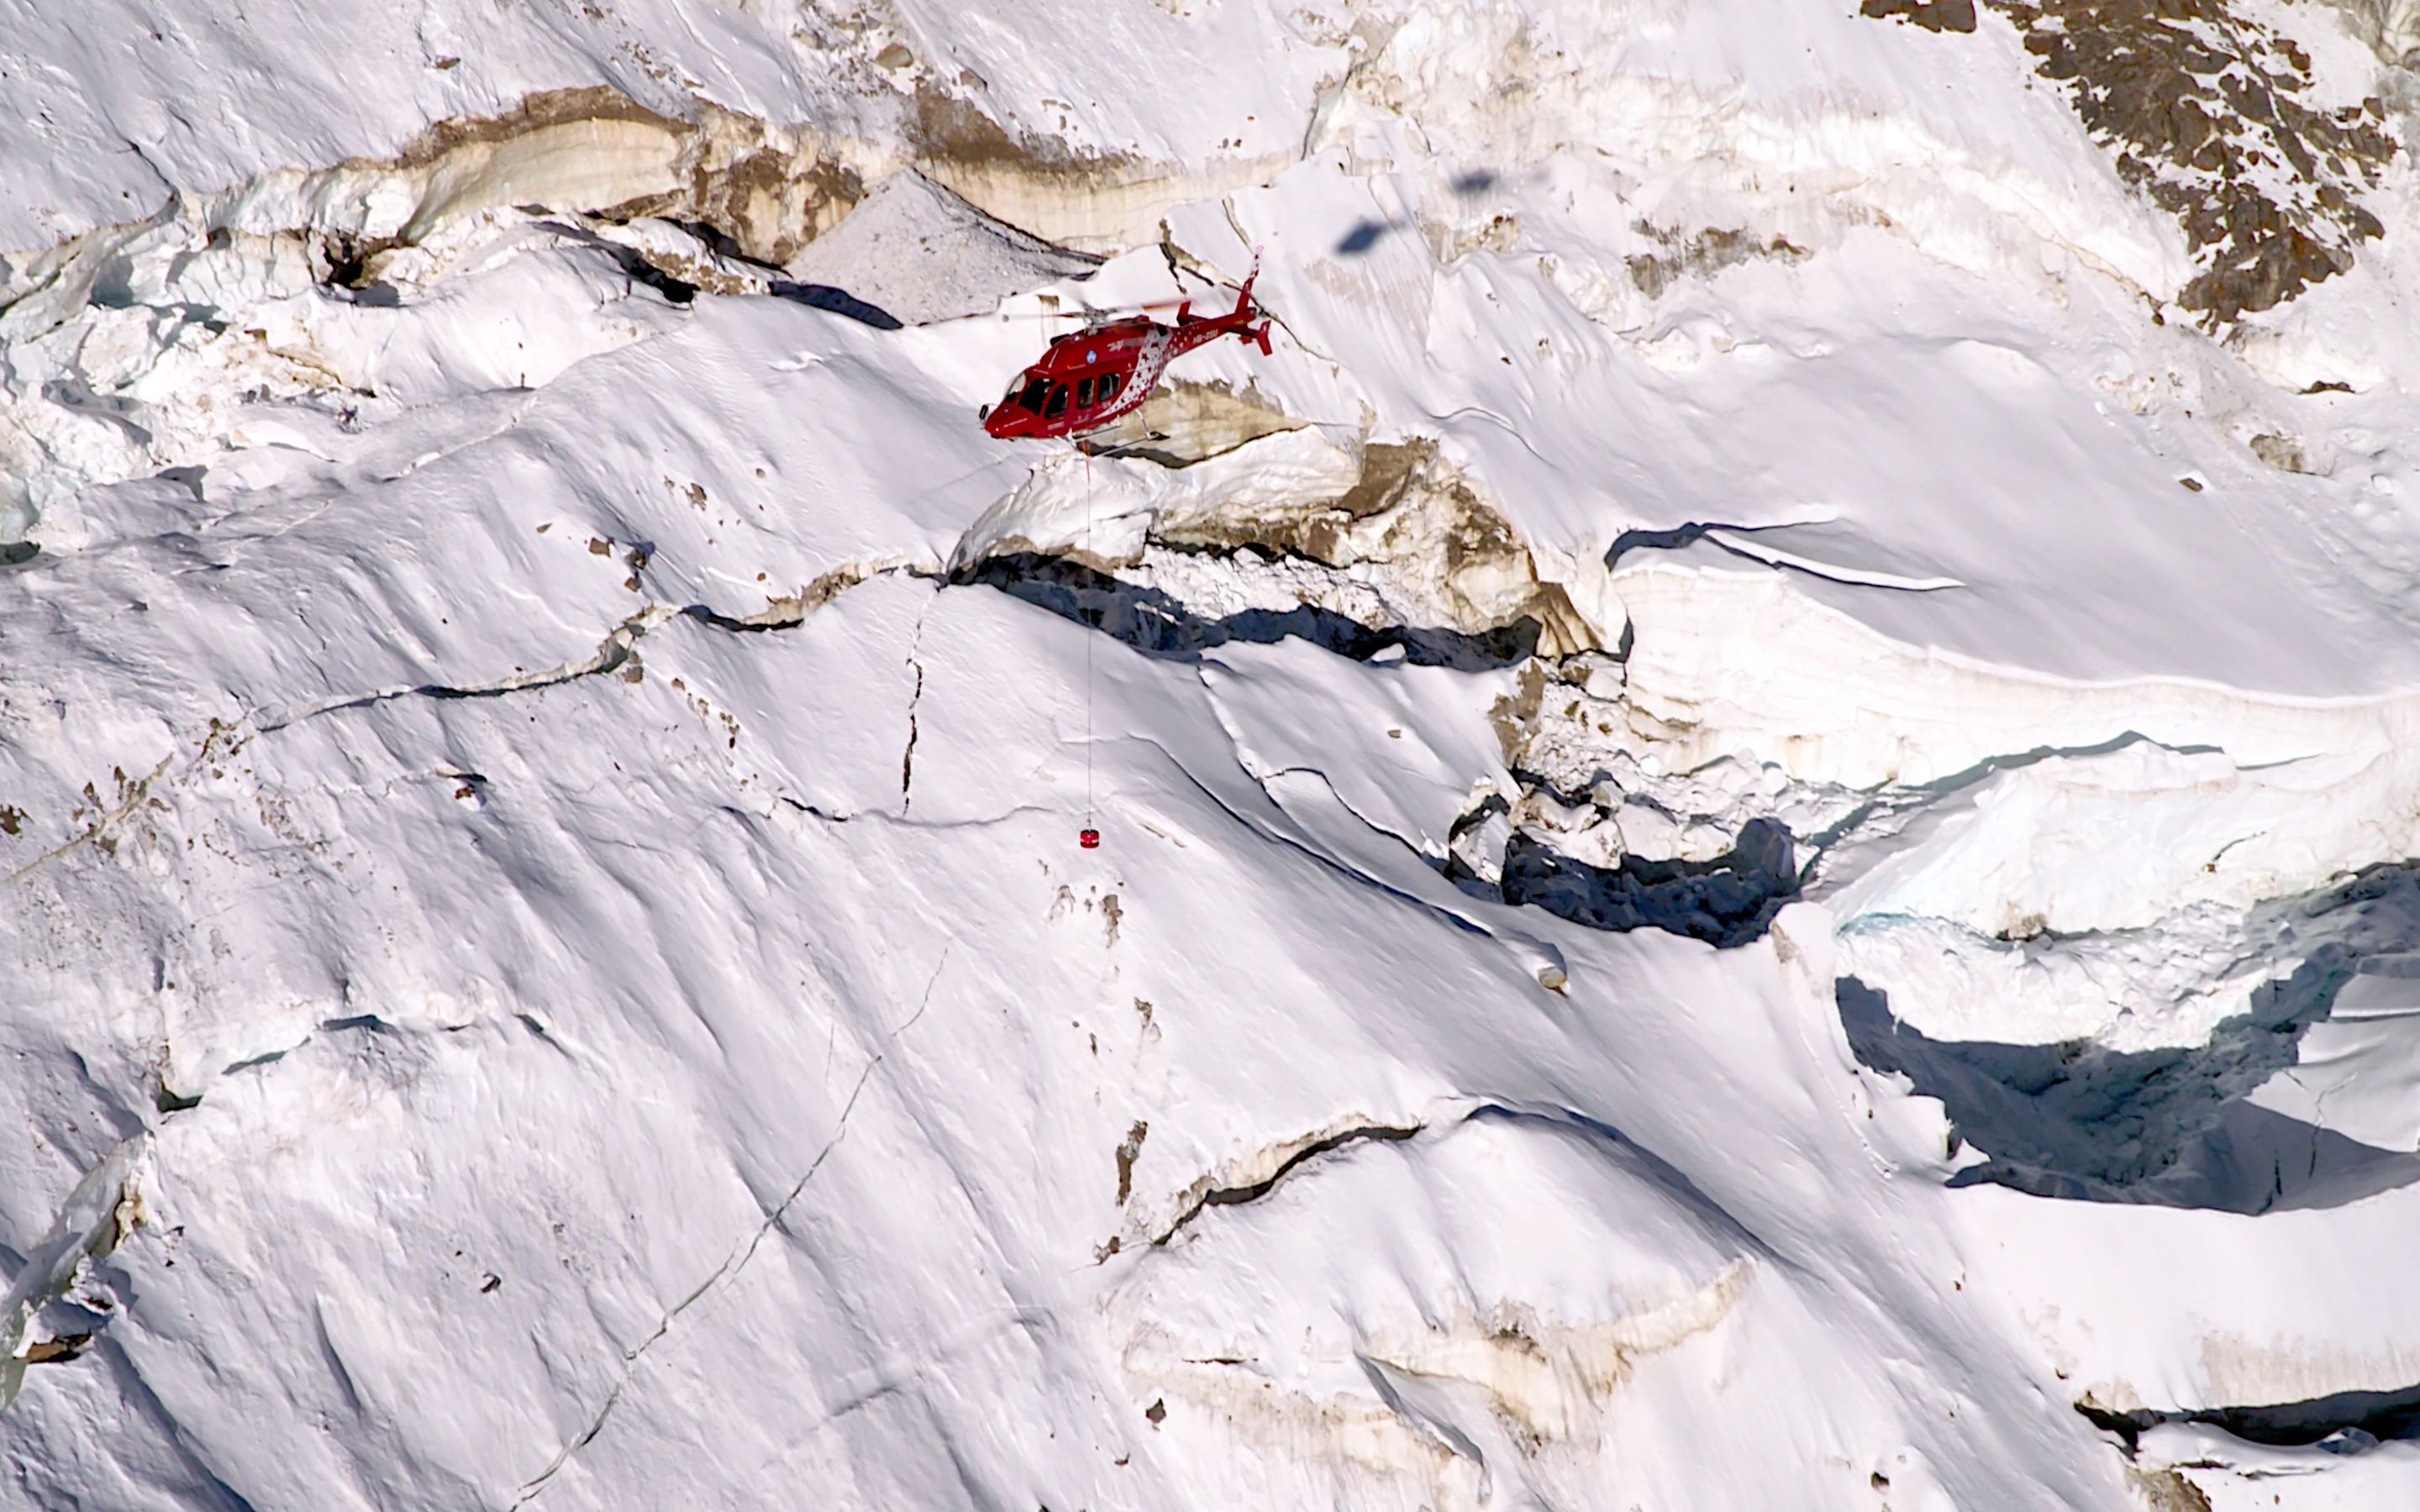 Air Zermatt on a test flight with the RECCO SAR Helicopter Detector searching over a glacier.